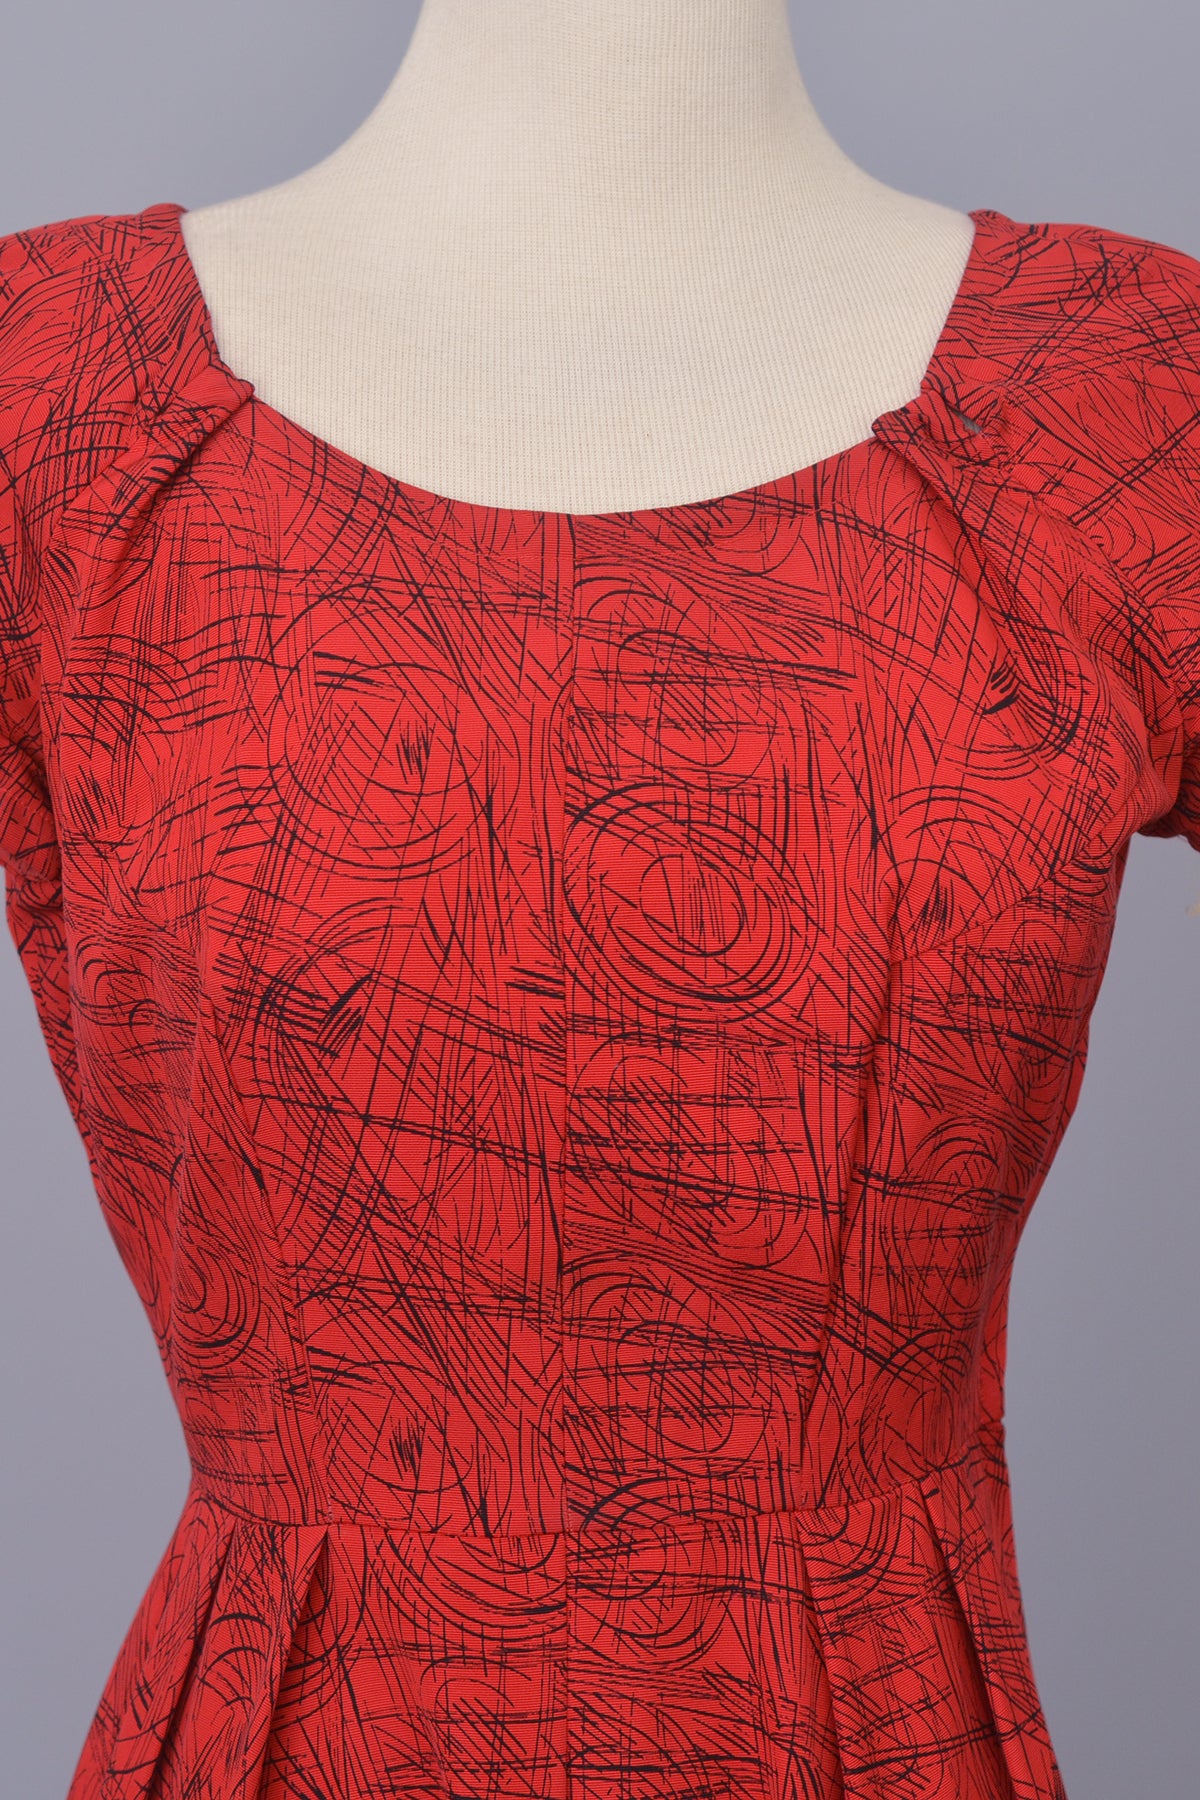 1950s Red with Black Atomic Sketch Print Dress